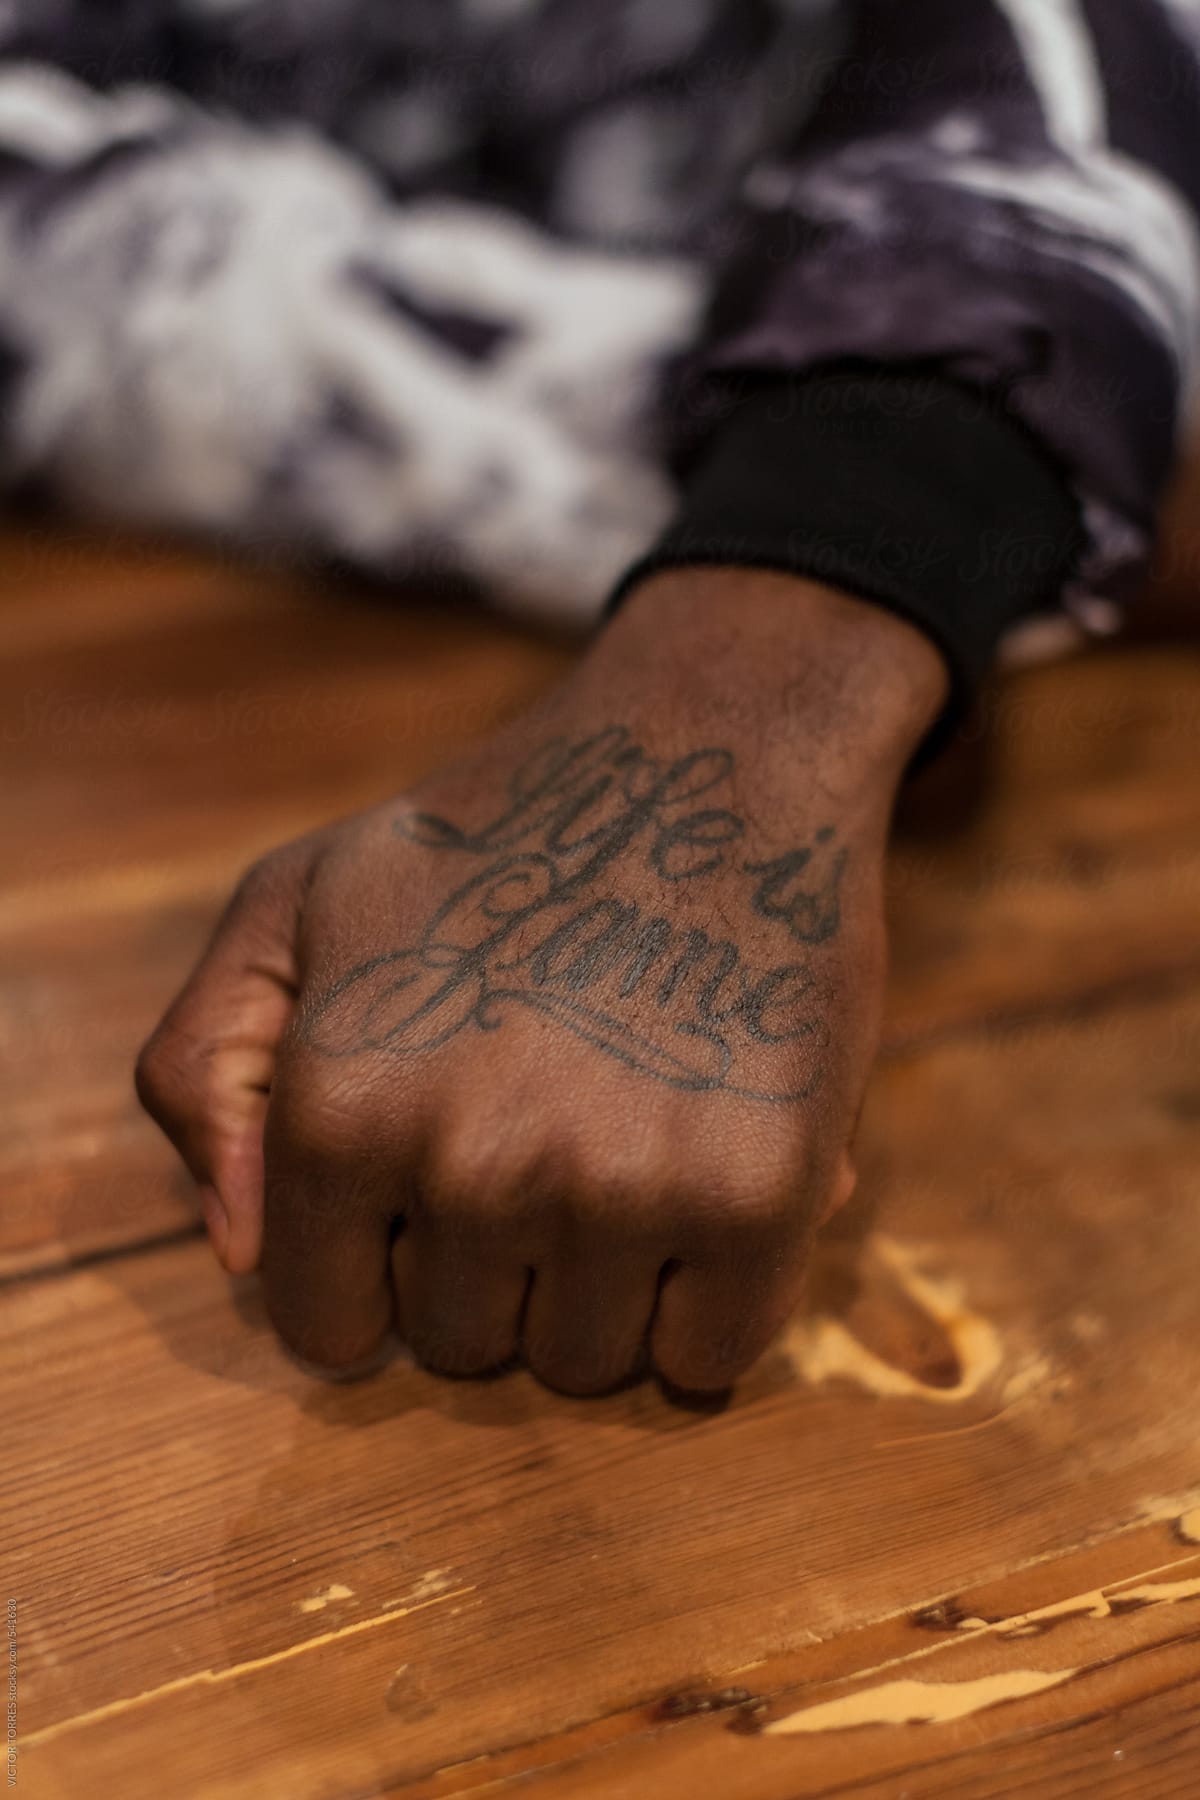 Hand Of An African Man With A Letter Tattoo